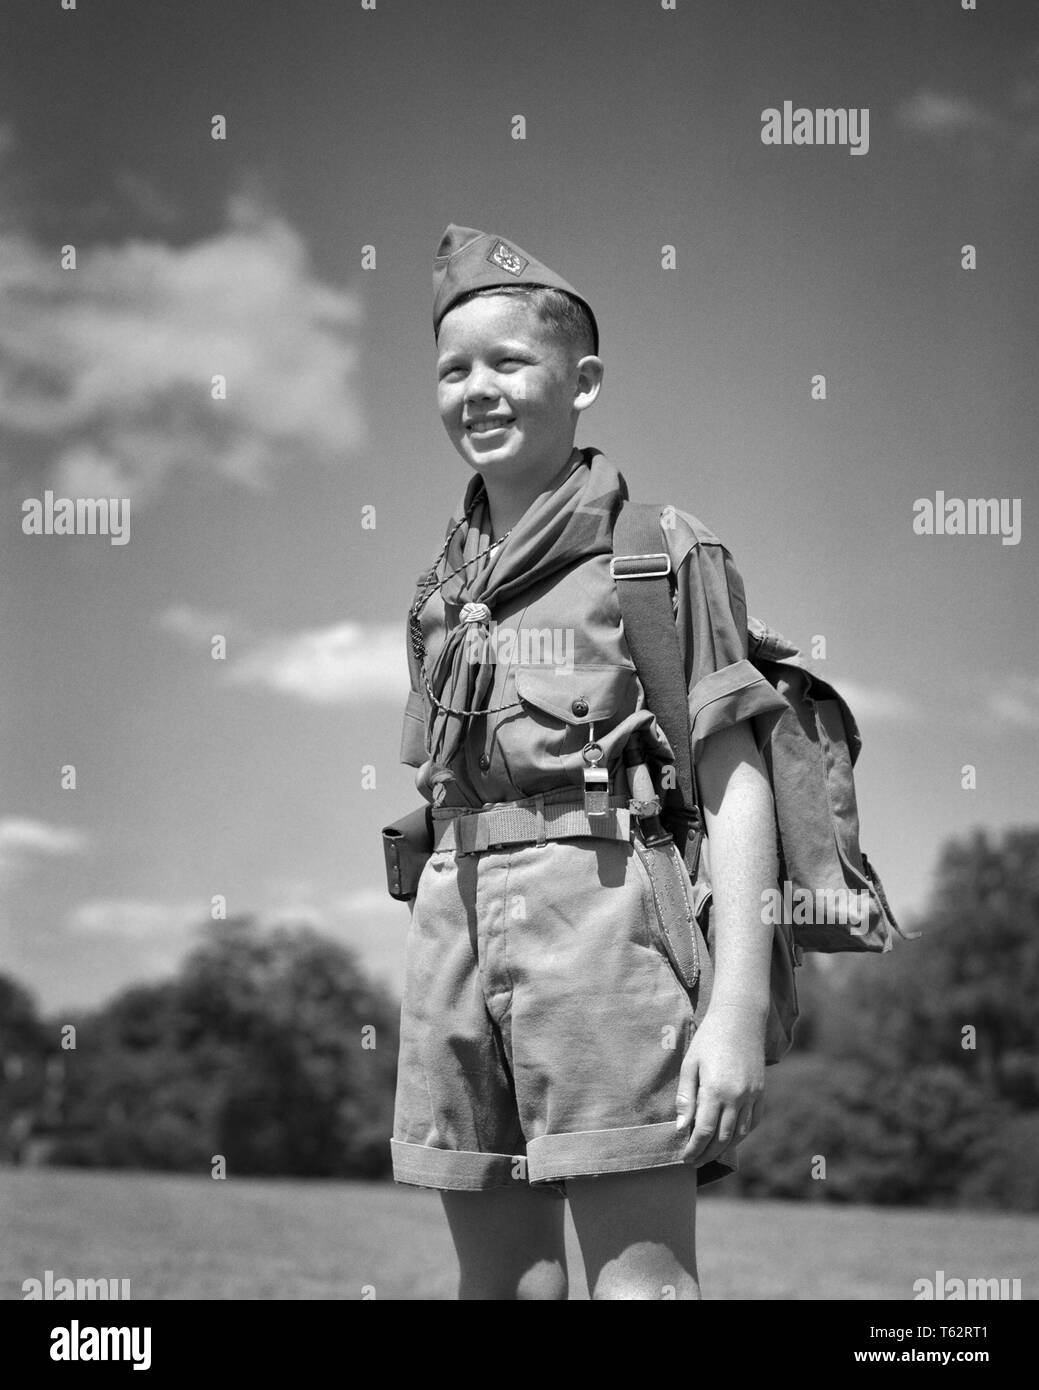 Boy scouts uniform hi-res stock photography and images - Alamy